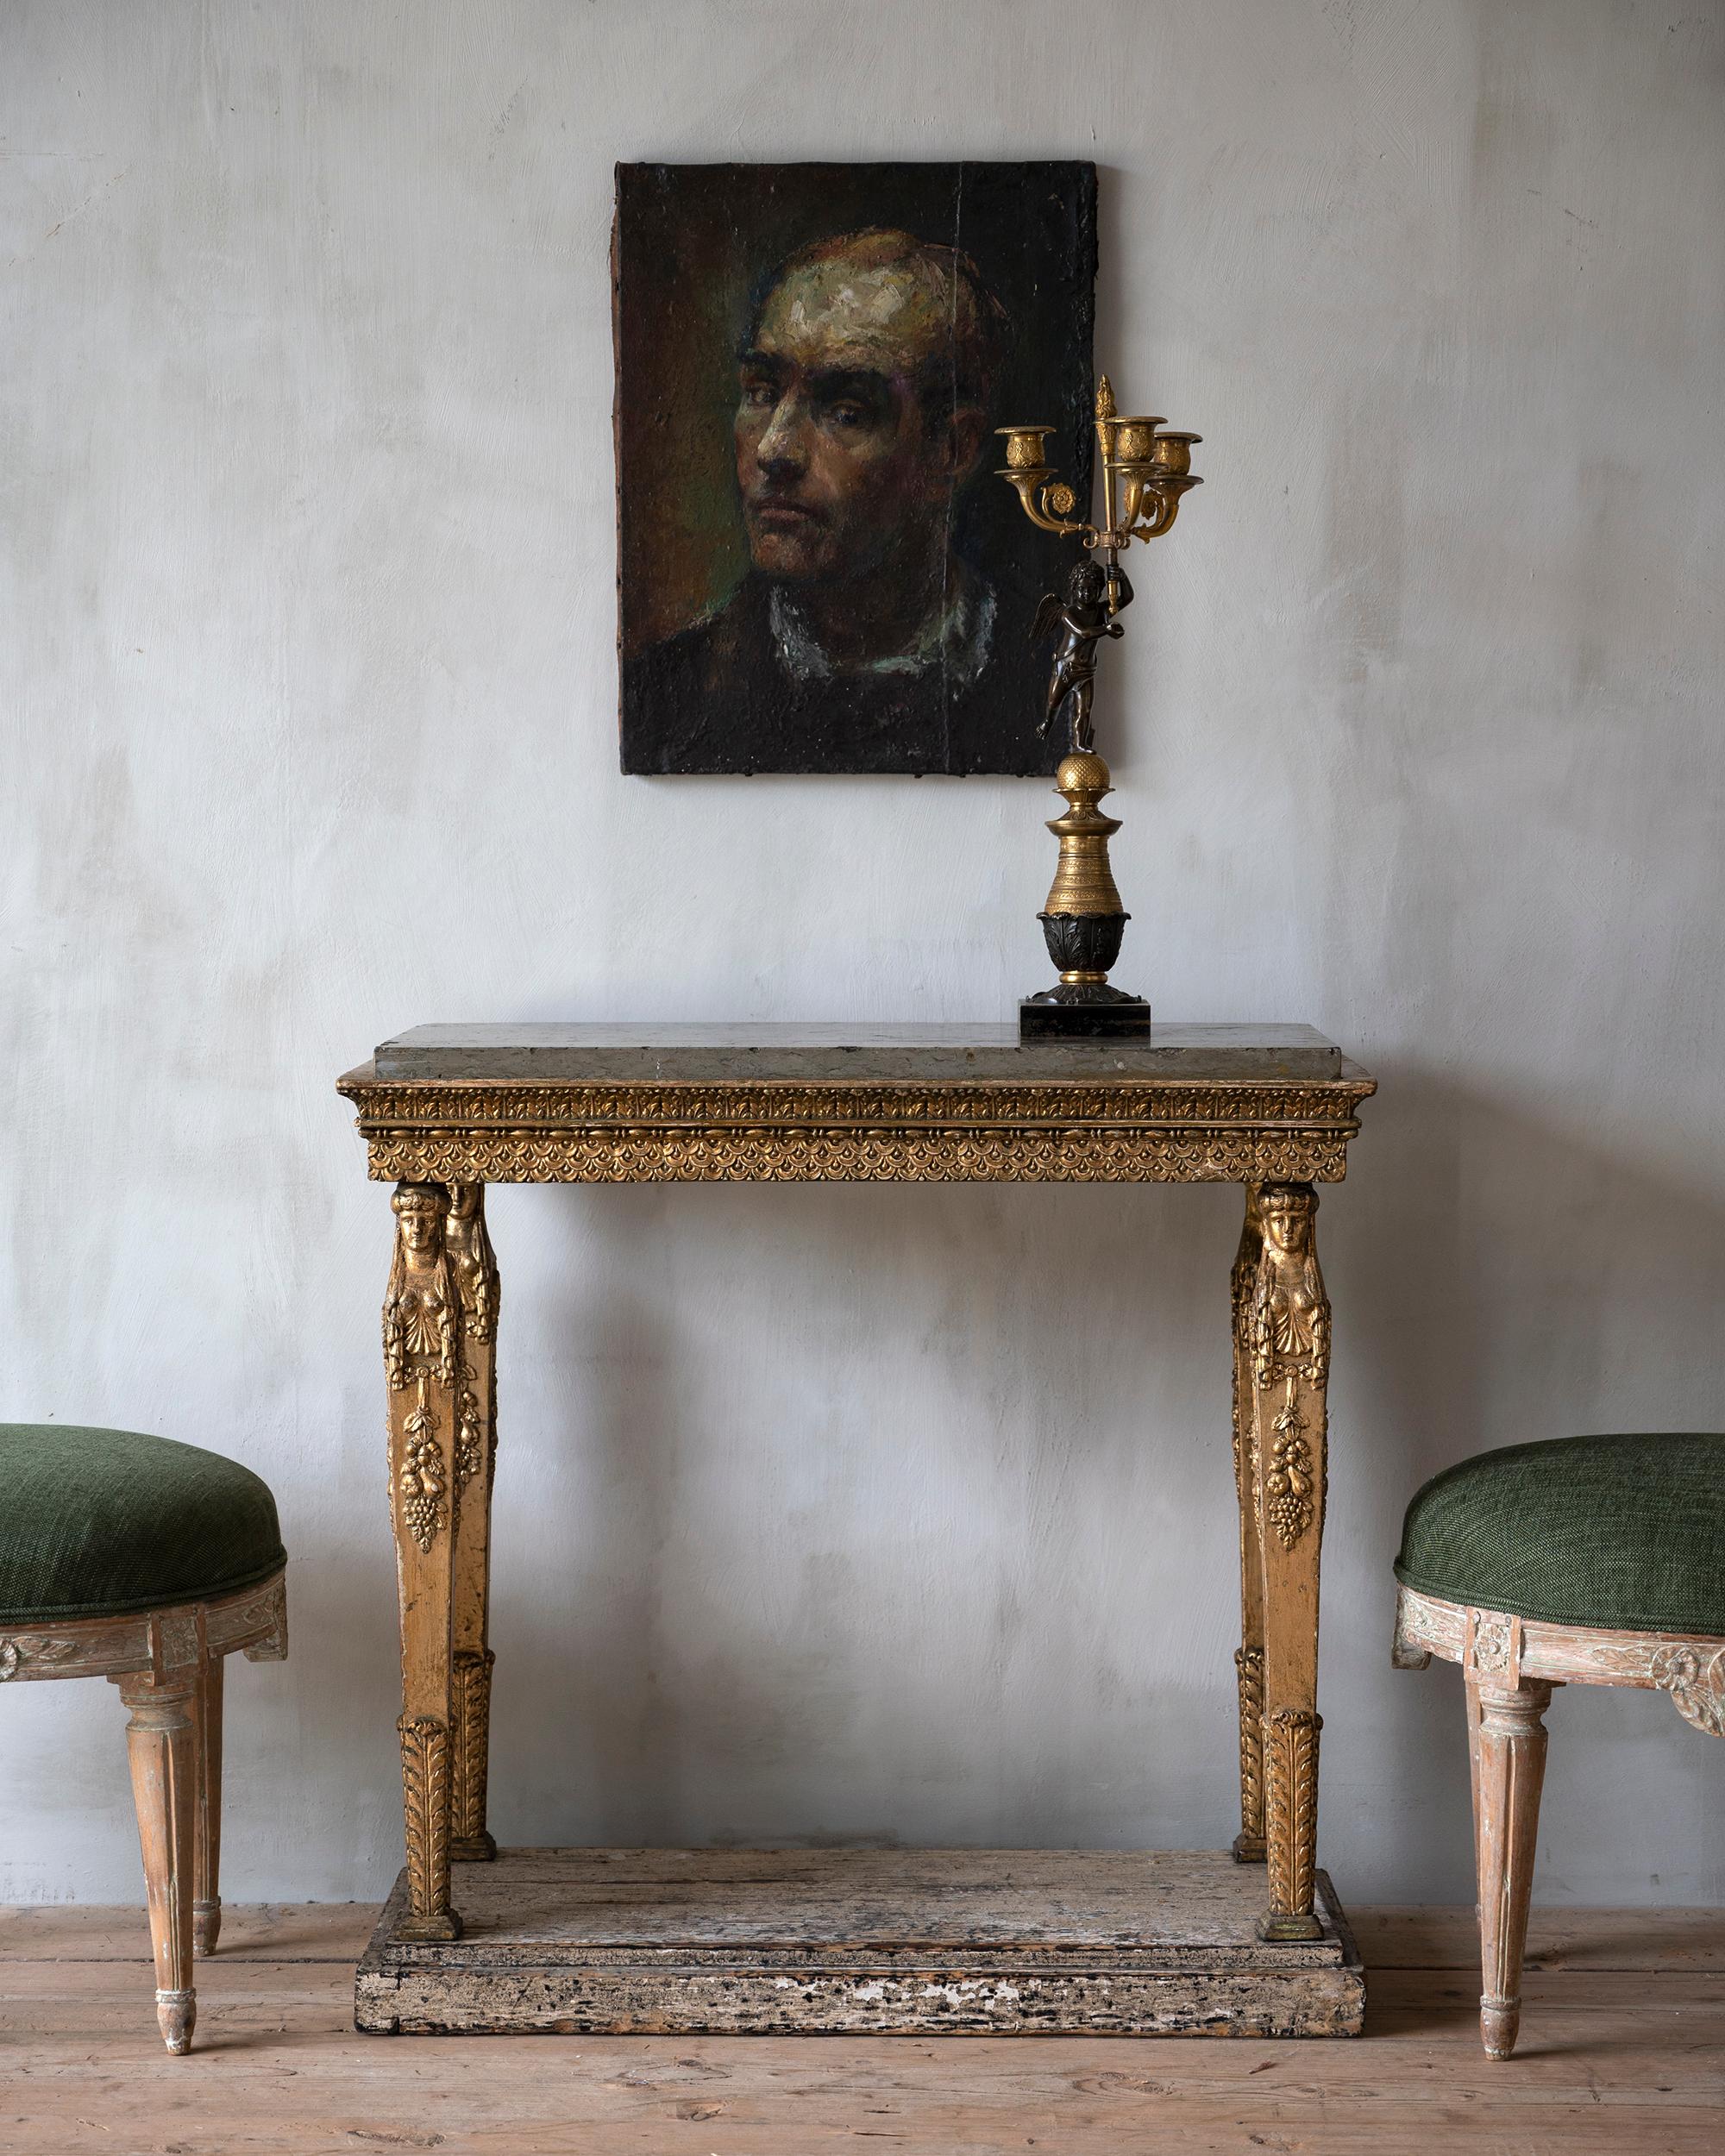 Fine 19th Century Late Gustavian Gilt Wood Console Table with Its original grey hand chiseled limestone supported by four tapered golden wooden legs with female figures. Ca 1810 - 20 Stockholm, Sweden. 